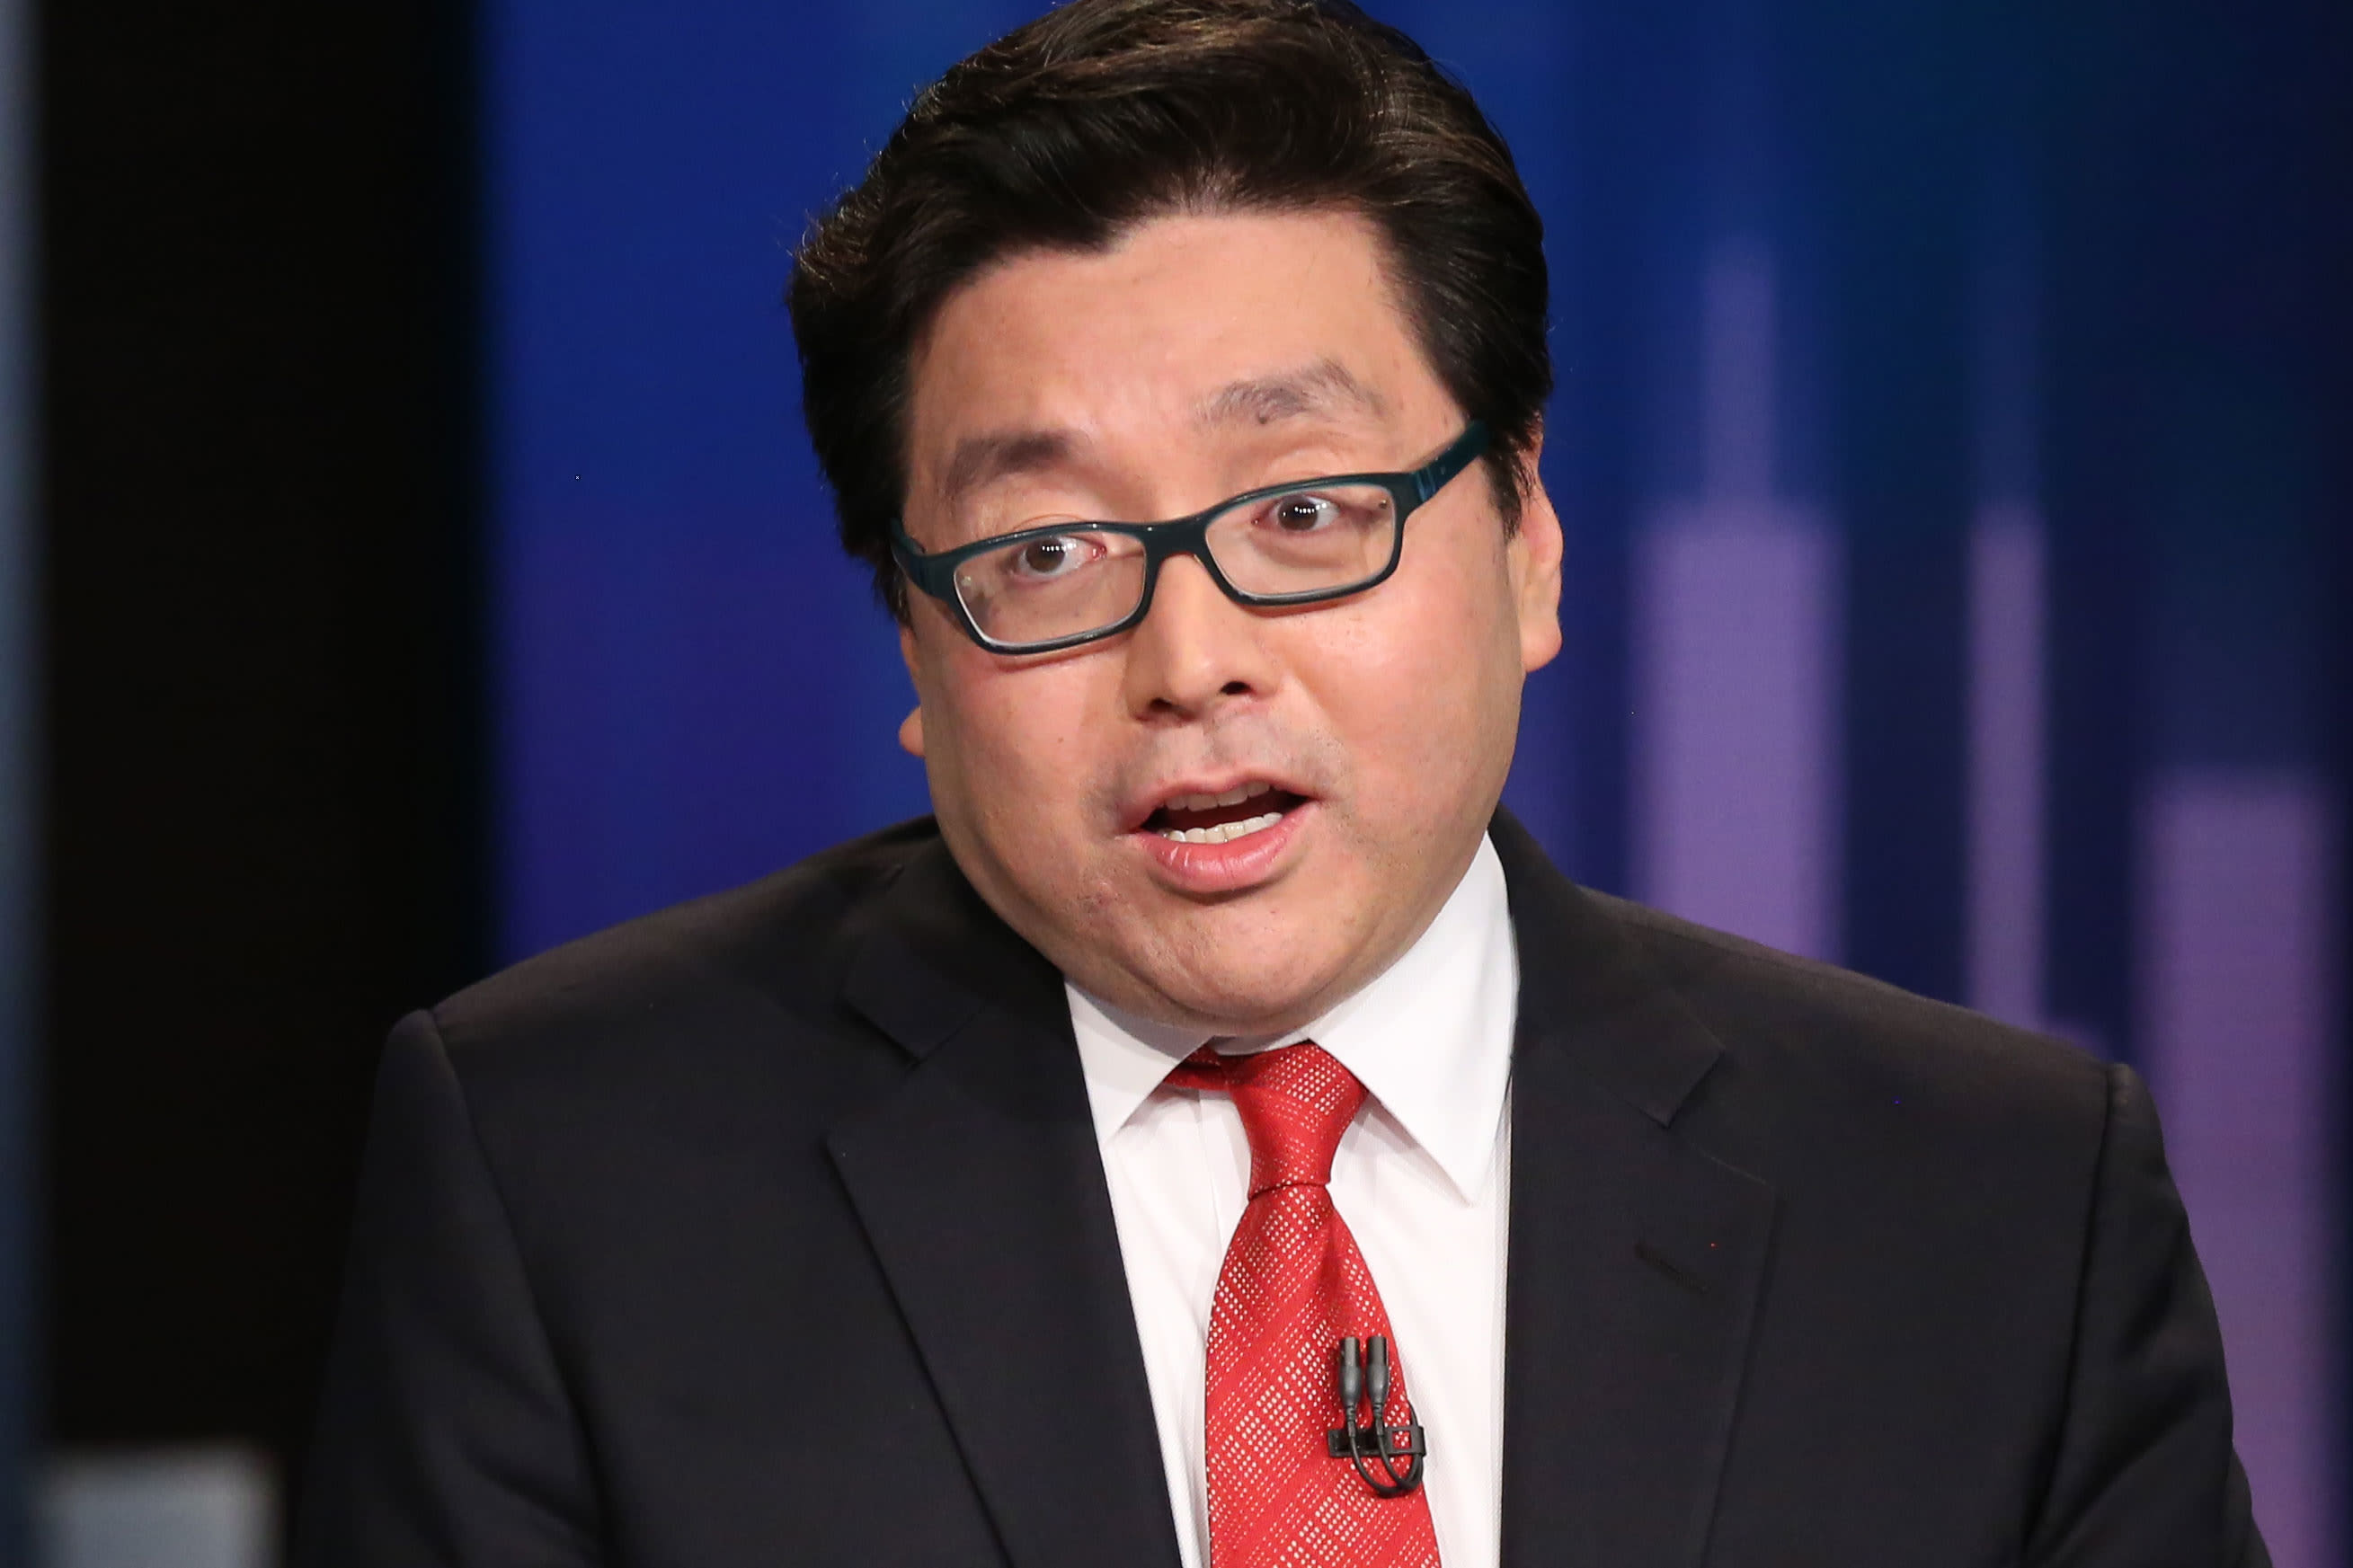 Fundstrat’s Tom Lee expects ‘face-ripper rally’ in April